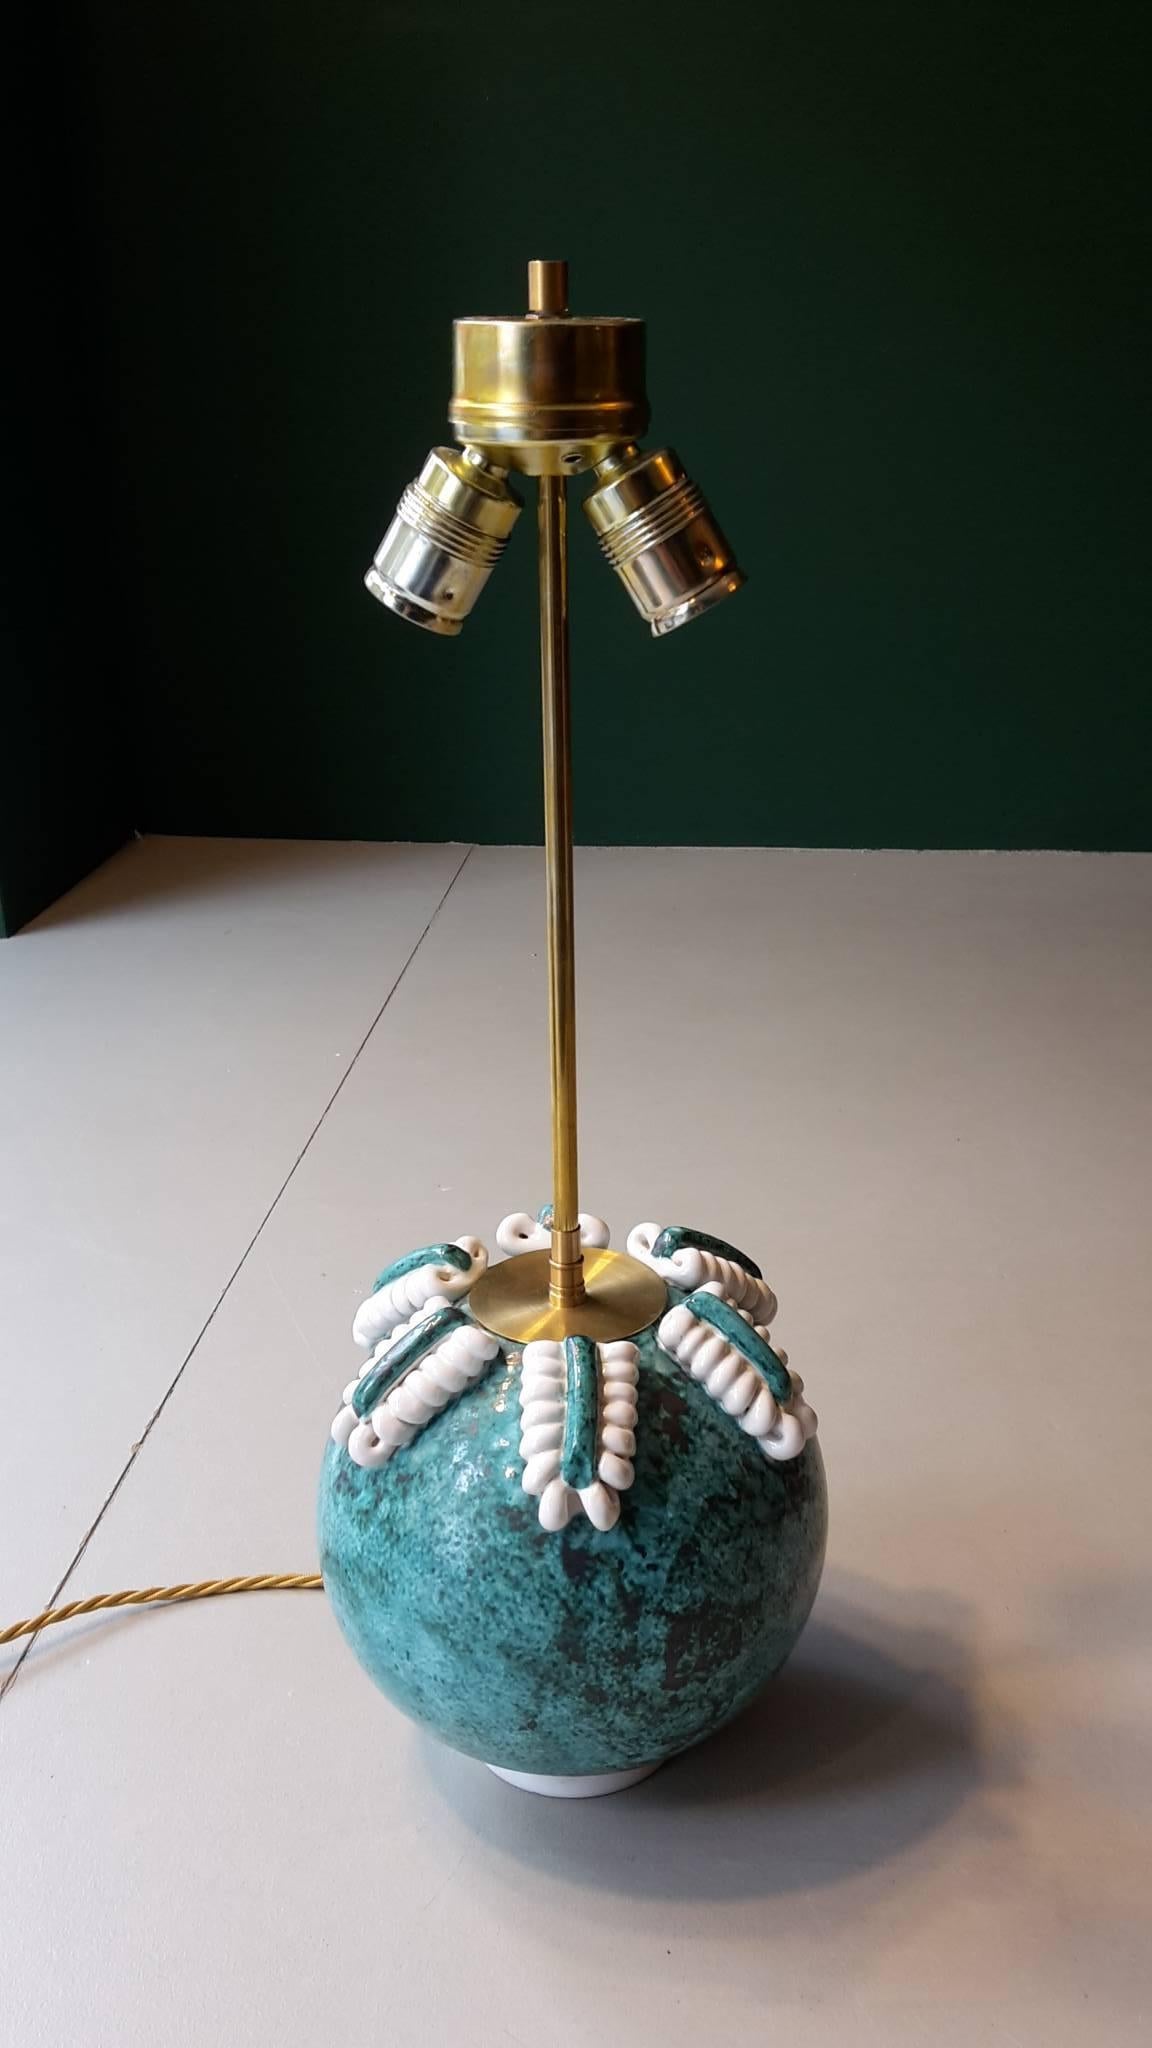 Early 20th Century Art Deco Table Lamp Made of Turquoise and White Ceramic In Good Condition For Sale In Berlin, DE